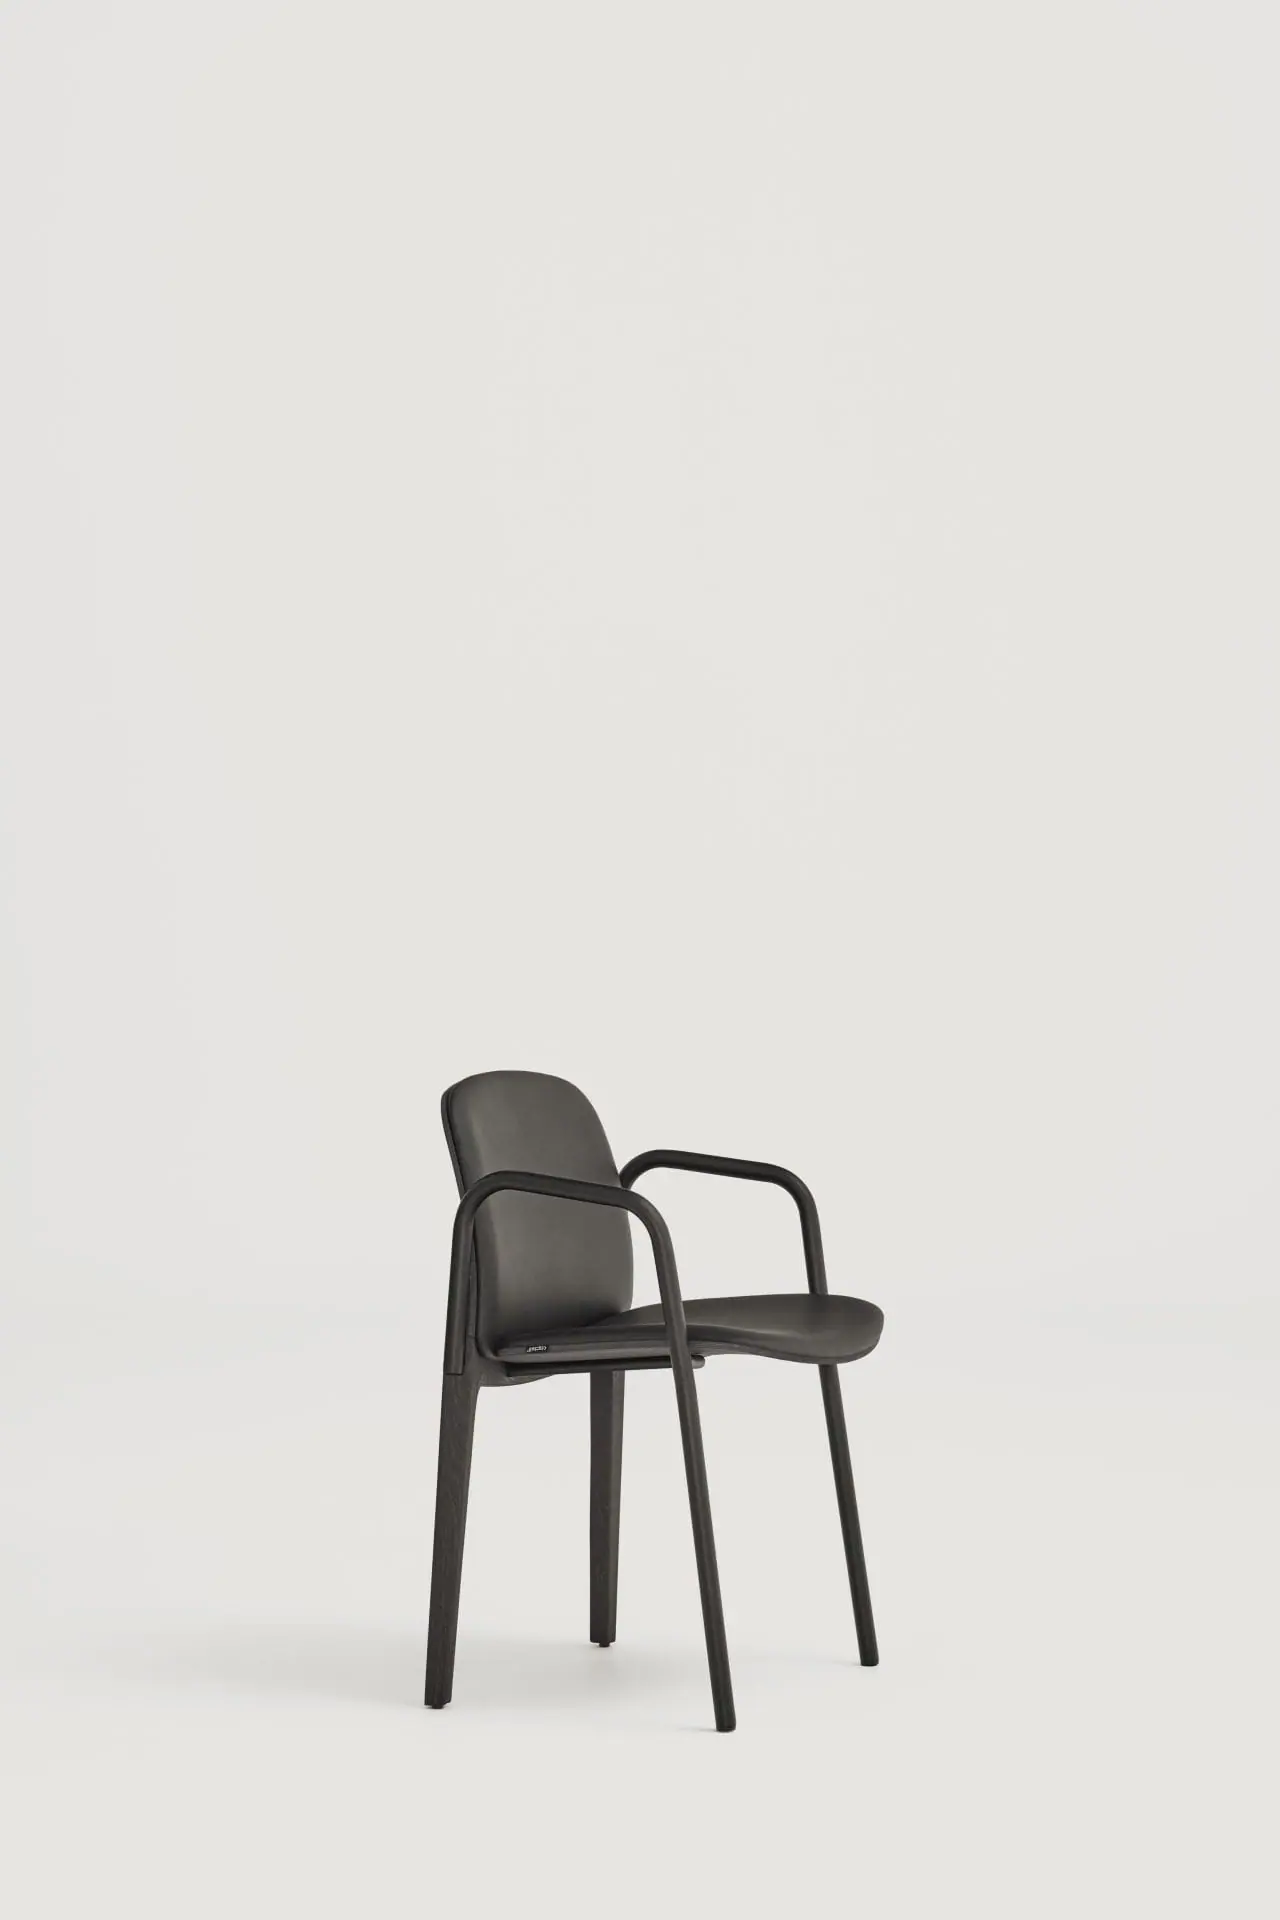 capdell-match-chair-05